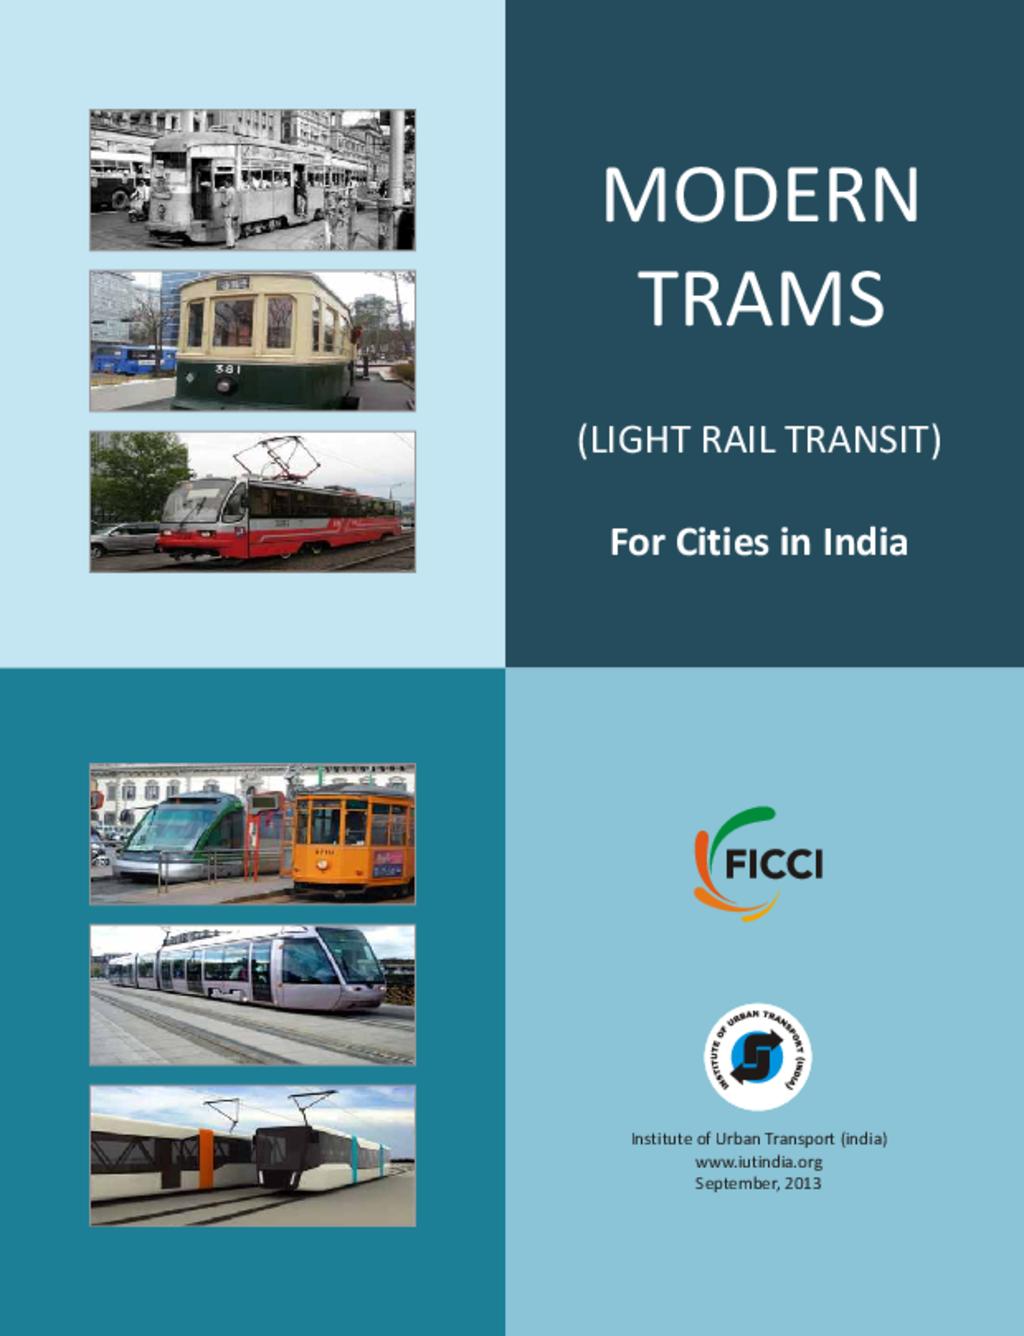 Modern Trams (Light Rail Transit) for Cities in India